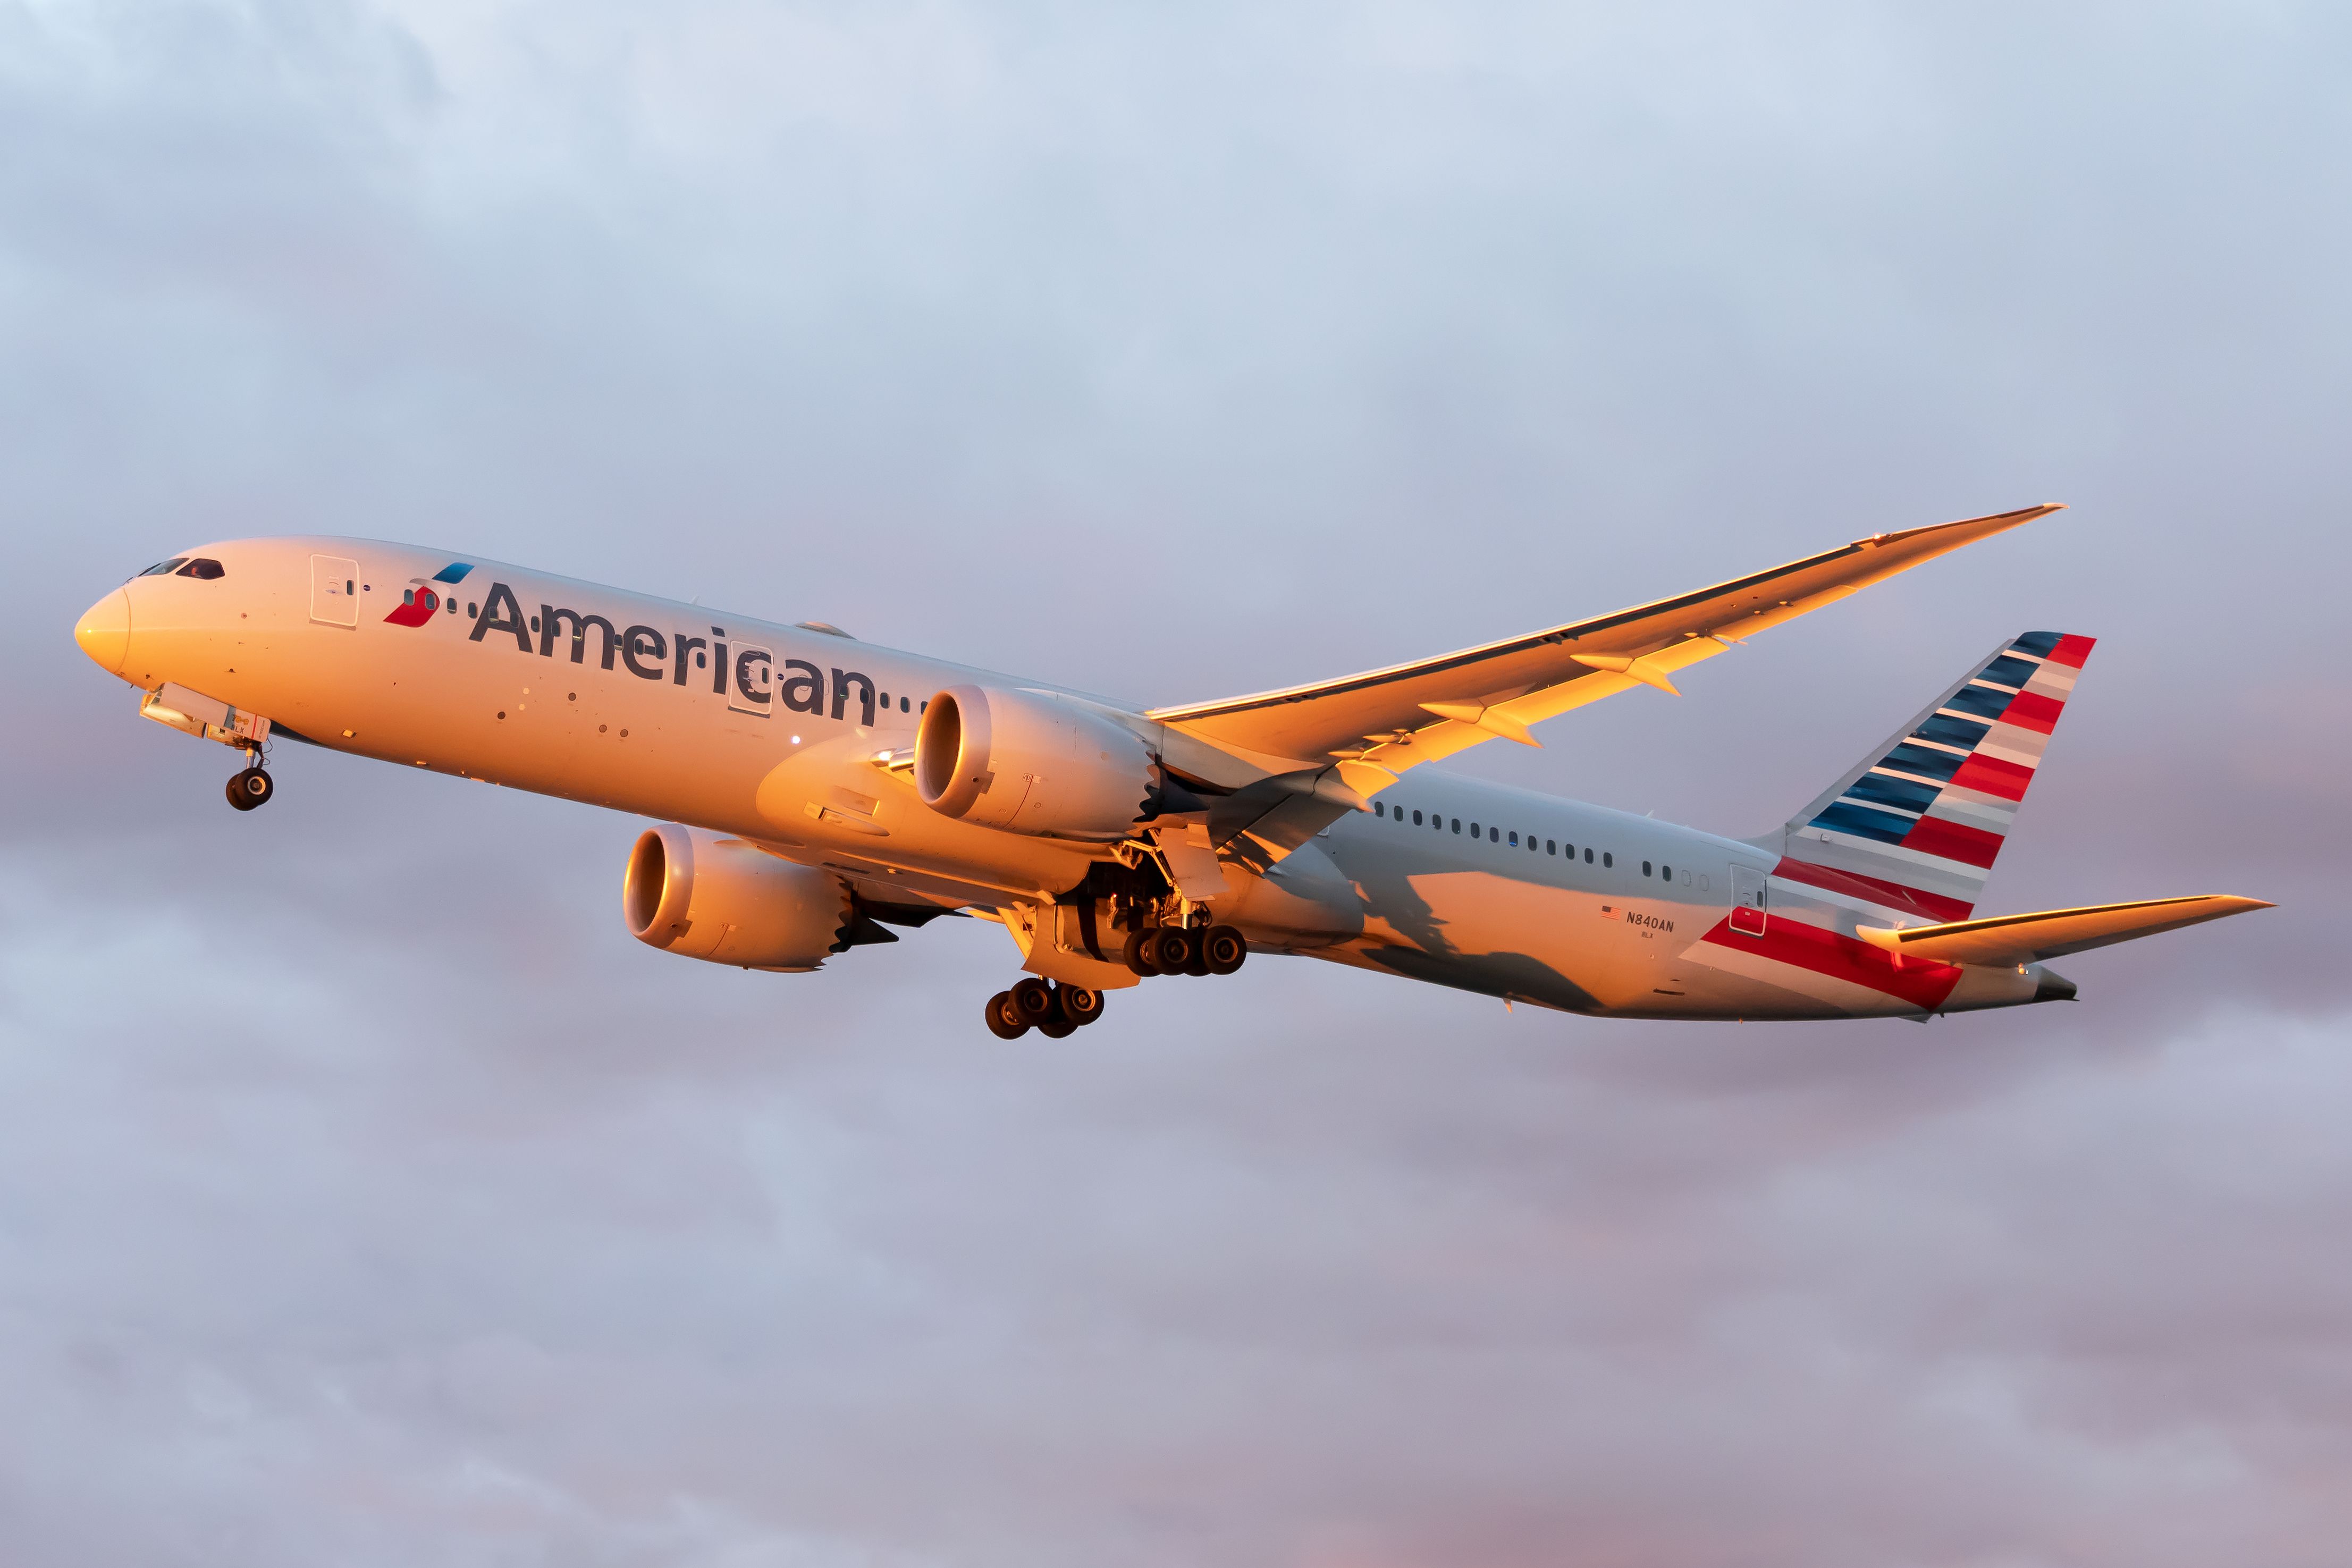 White Boeing 787 jetliner with red and blue stripes on the tail and American in blue lettering on the side flying in cloudy sky